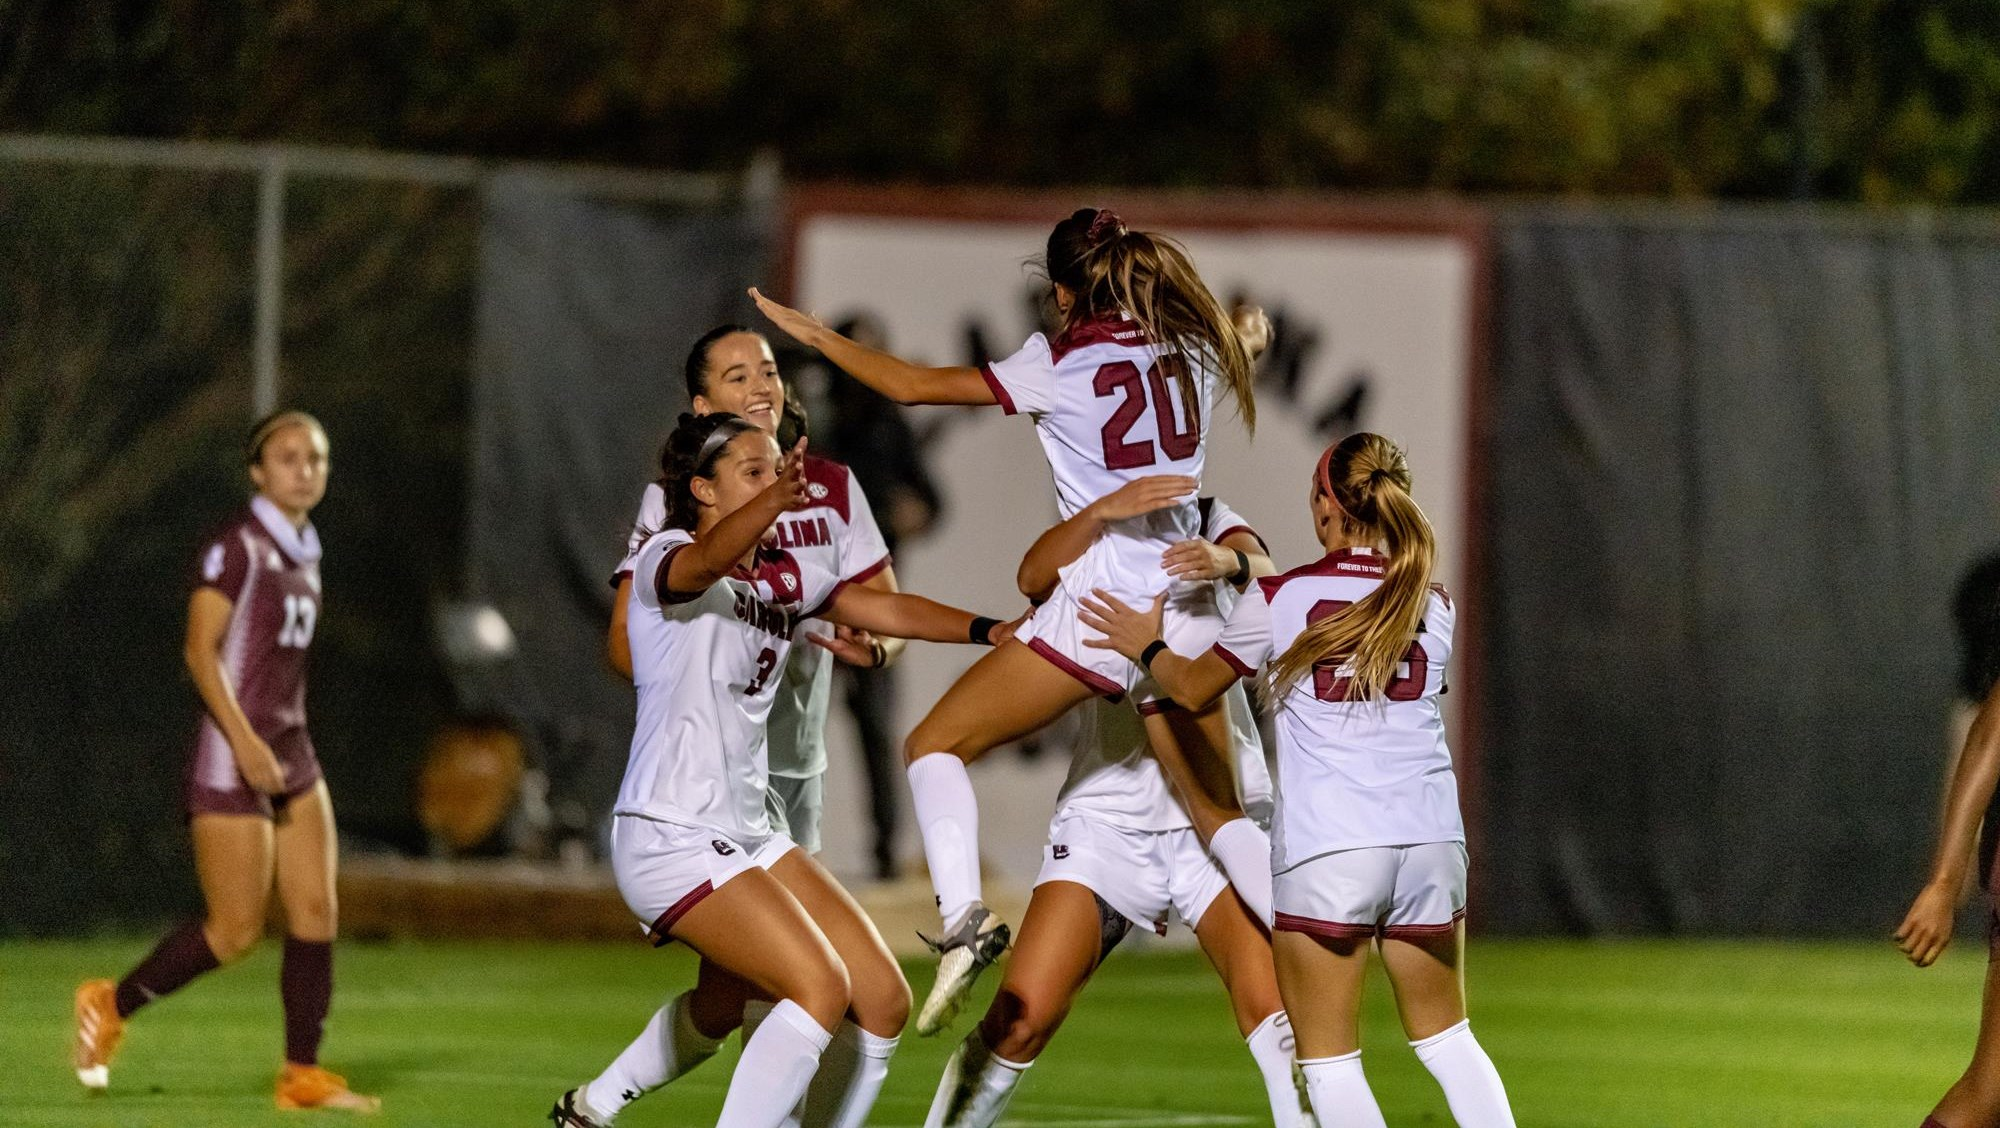 Corinna Zullo Named on TopDrawerSoccer Team of the Week